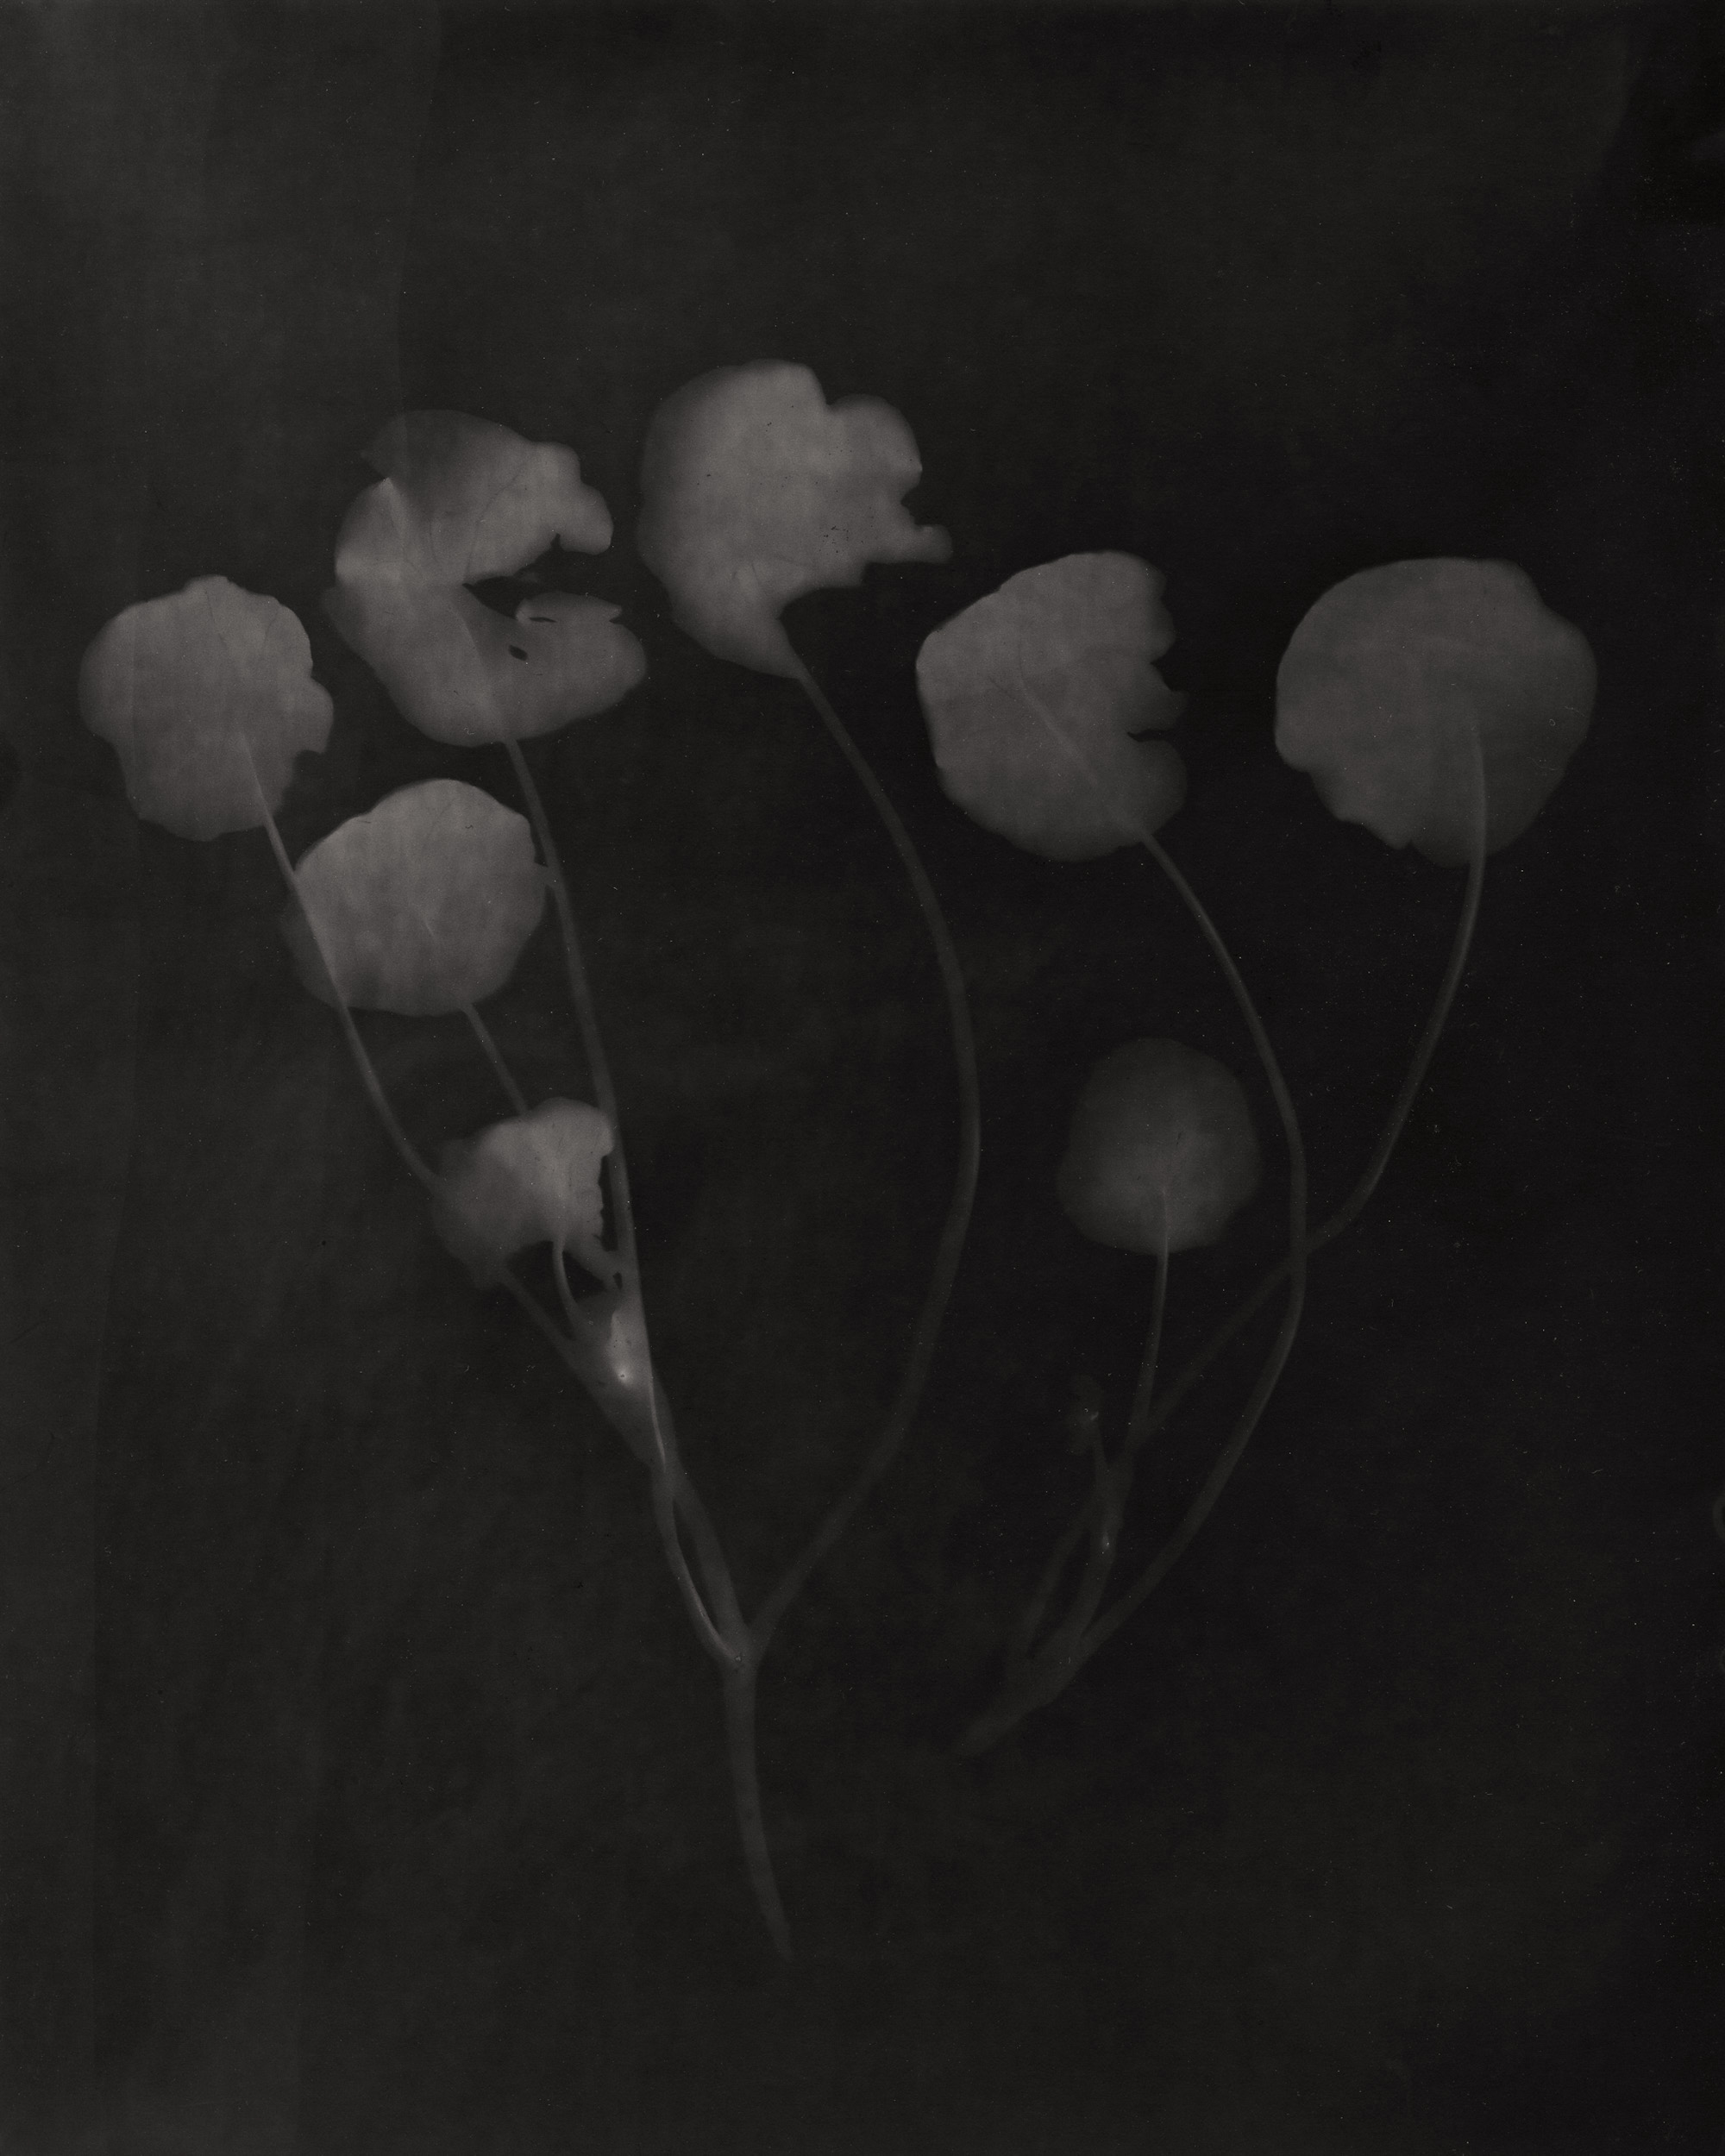  Under the light of the moon, I create haunting impressions of the night, a time deeply associated with mortality and the primordial. Here, I capture that which is both immaterial and eternal.&nbsp;  Unique silver gelatin prints 